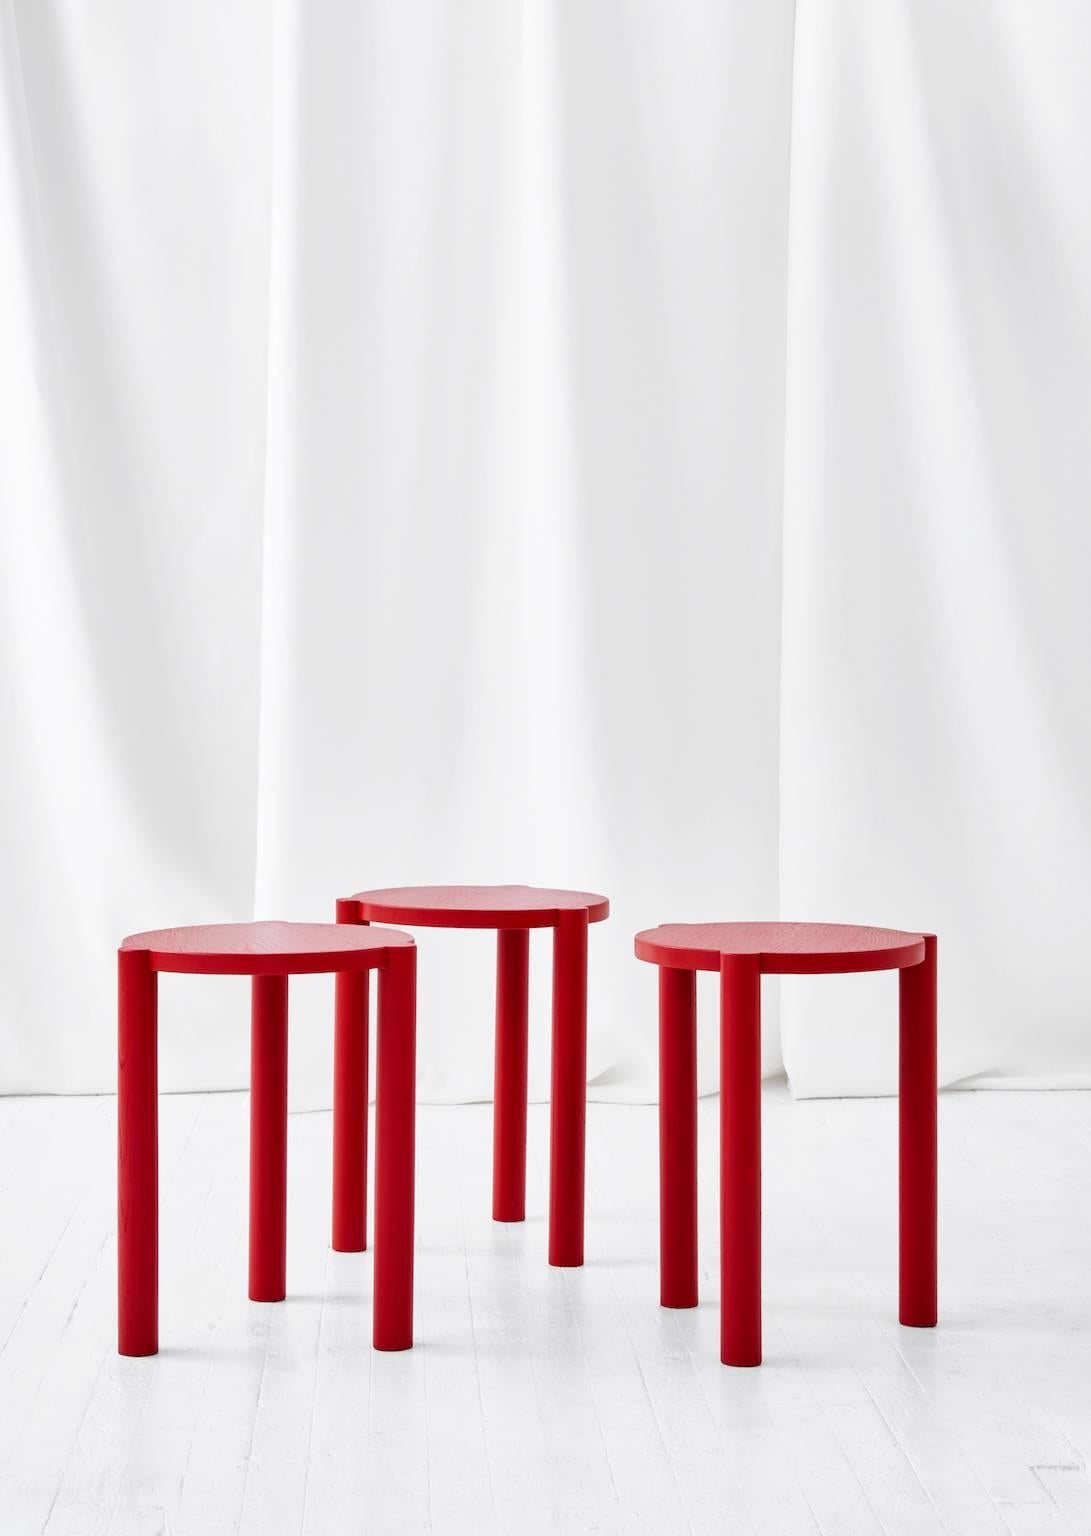 The WC3 stool by ASH, NYC is a playful stool. The hand-turned legs join seamlessly with the seat to create an elegant, handcrafted joint that defies gravity.
 
An exercise in Minimalist design, the hidden joints allow for the stool to function